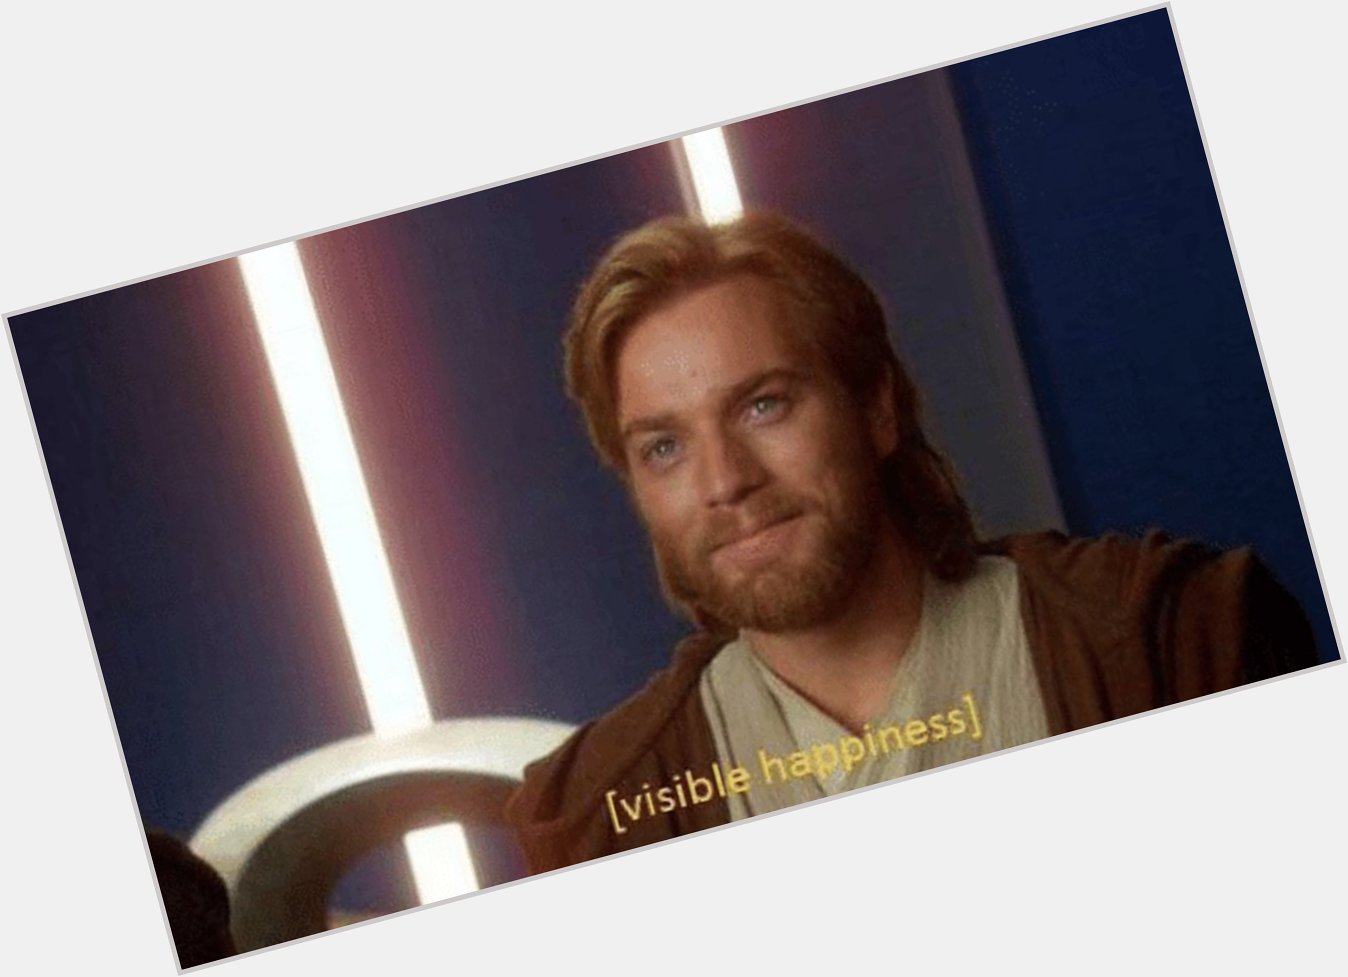 I\m a bit late but happy birthday to the brilliant actor Ewan McGregor 